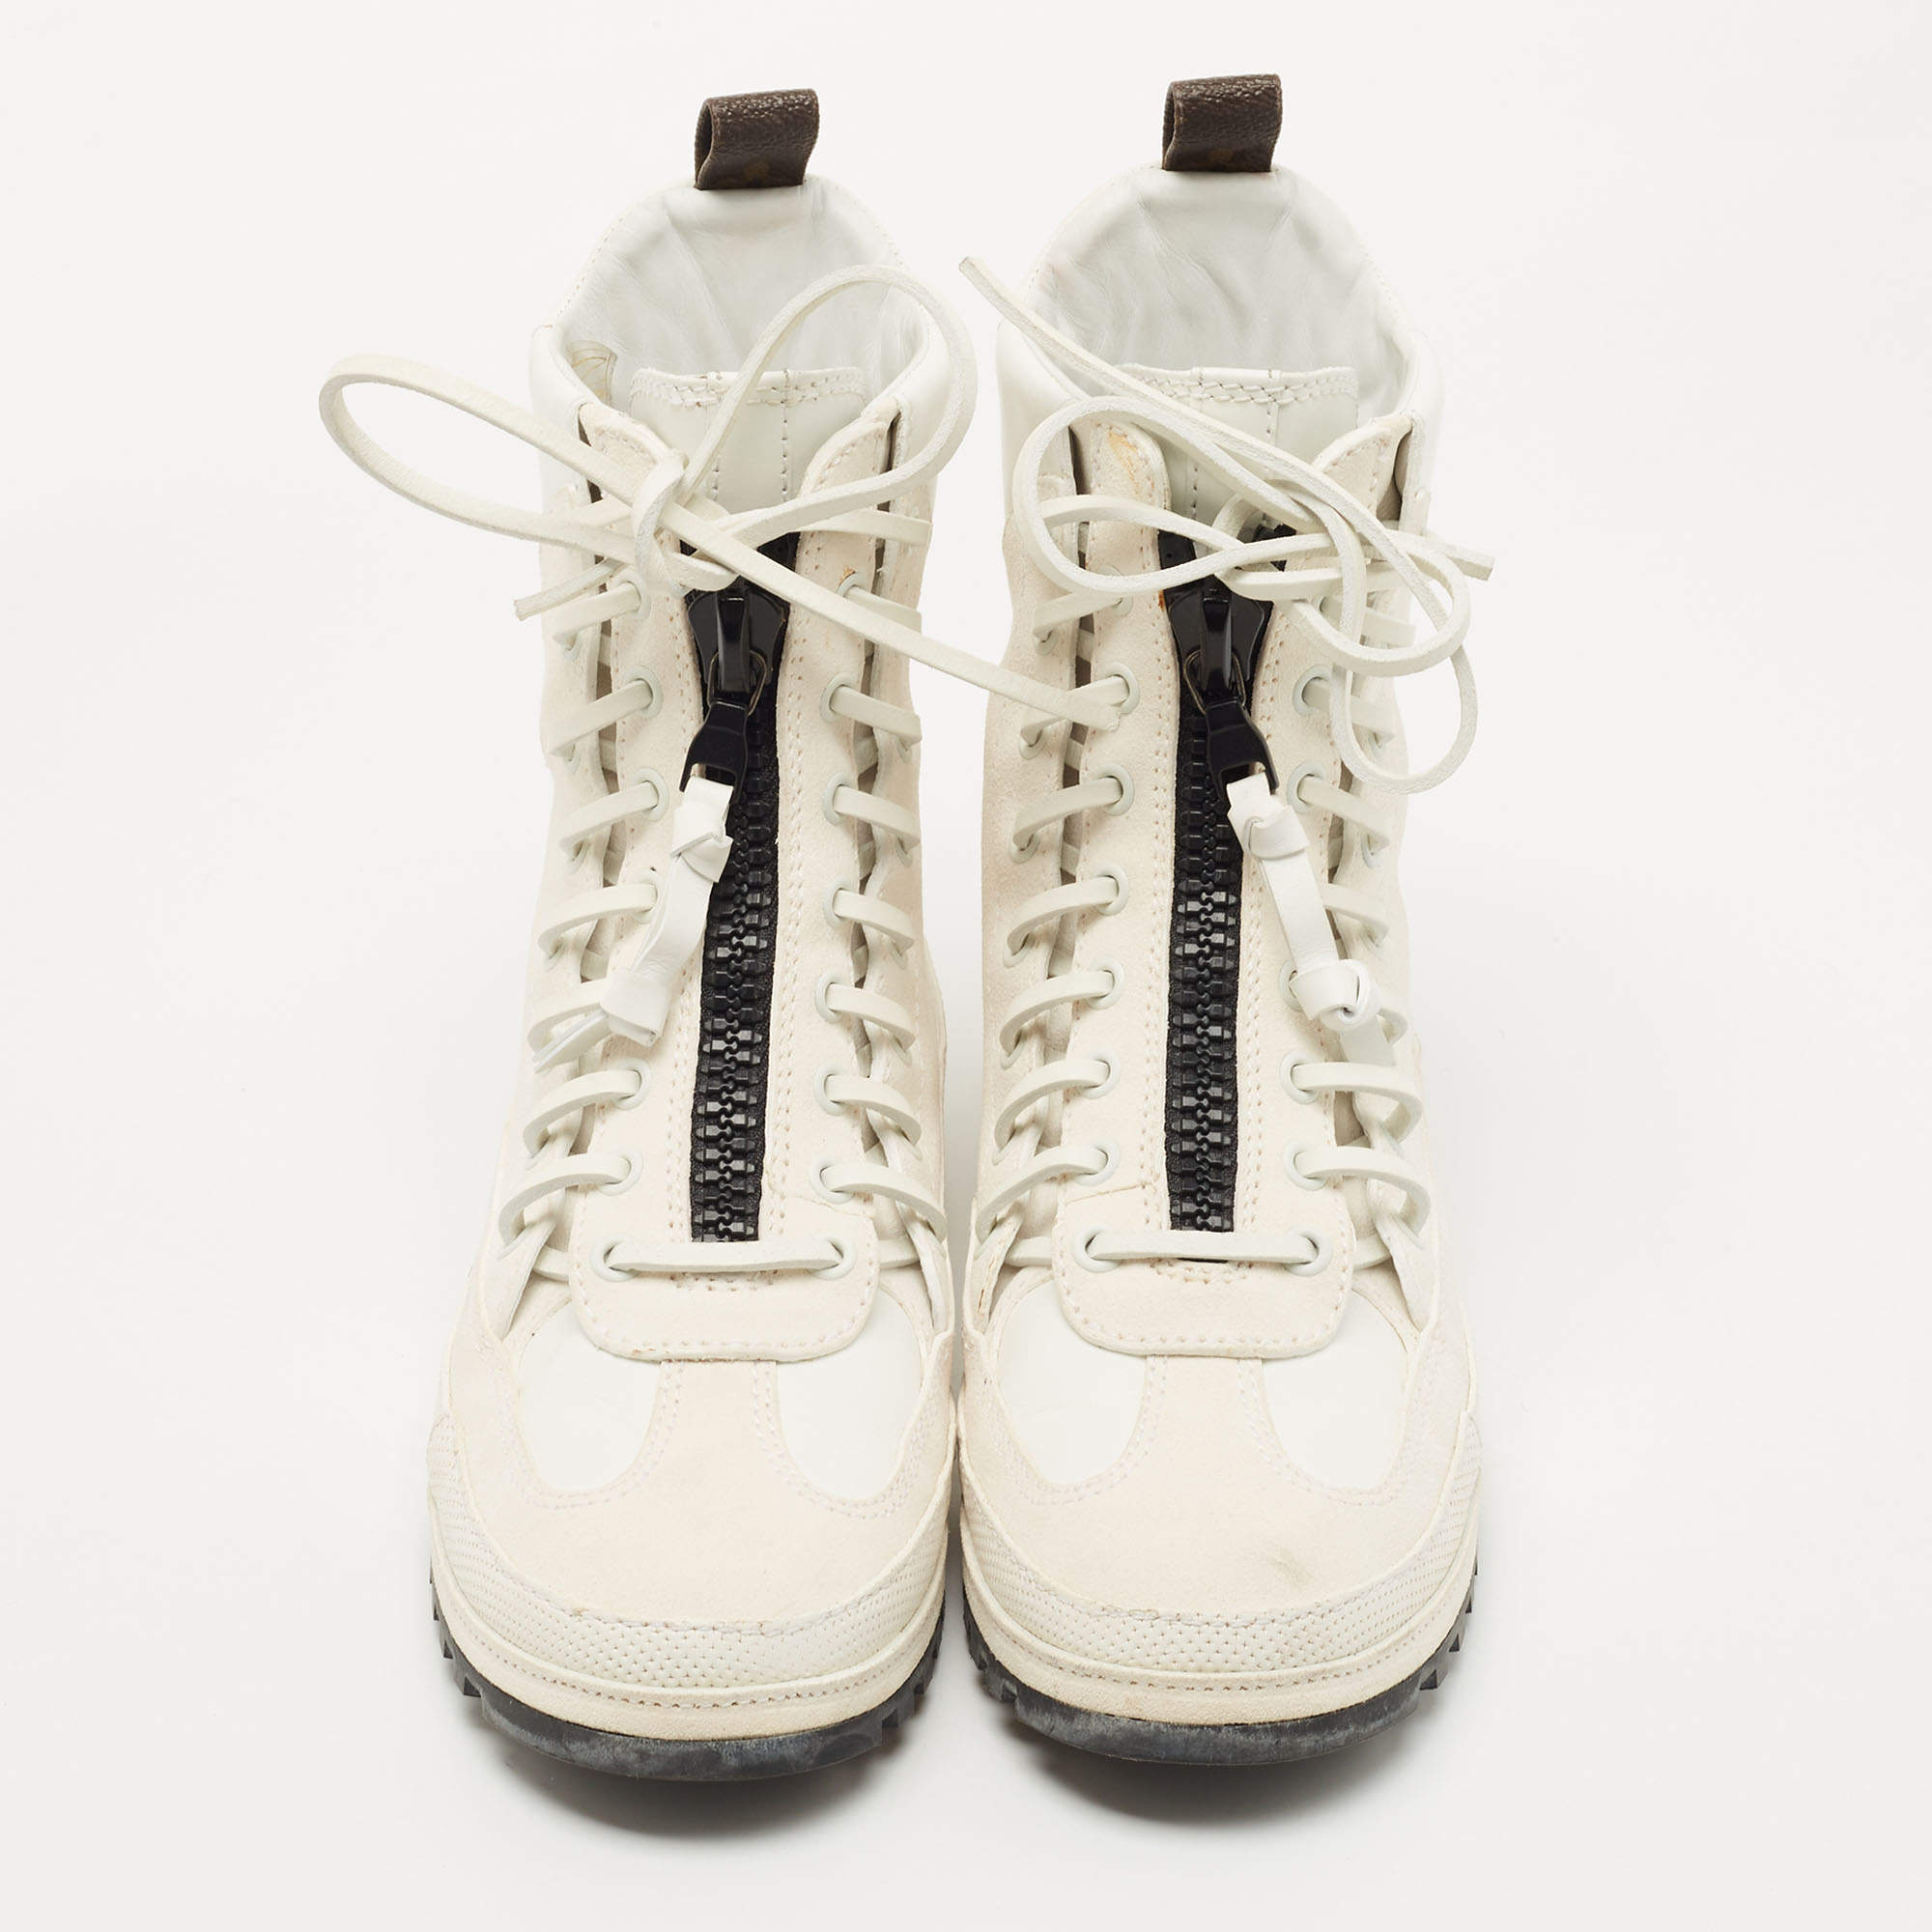 Louis Vuitton White/Cream Suede and Leather High Top Sneakers Size